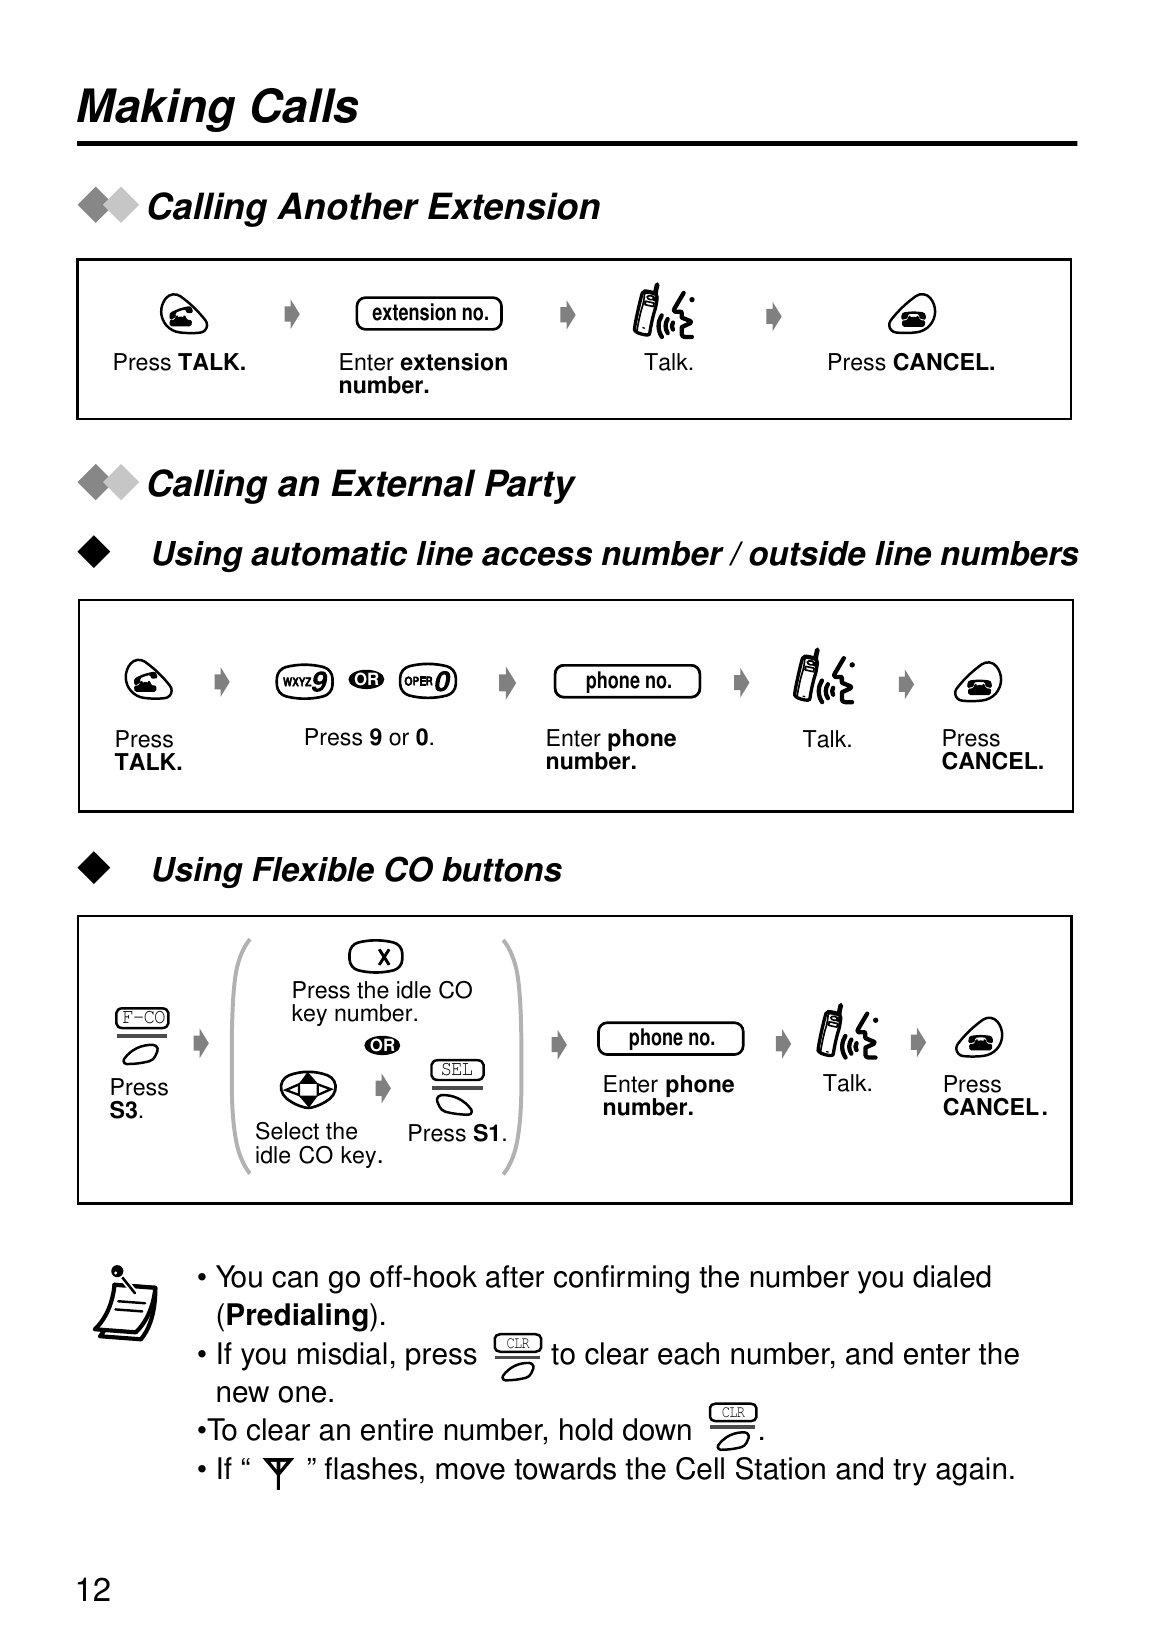 12Making CallsCalling Another ExtensionCalling an External Party  Using automatic line access number / outside line numbers  Using Flexible CO buttons• You can go off-hook after confirming the number you dialed (Predialing).• If you misdial, press   to clear each number, and enter the new one.•To clear an entire number, hold down  .• If “   ” flashes, move towards the Cell Station and try again.extension no.Enter extensionnumber. Press CANCEL. Talk.Press TALK. Press 9 or 0.Enter phone number. phone no.phone no.PressCANCEL. Talk.PressTALK. ORPress CANCEL.F-COPress S3.Select the idle CO key.  Press the idle COkey number.ORPress S1.SELTalk.phone no.Enter phonenumber.CLRCLR